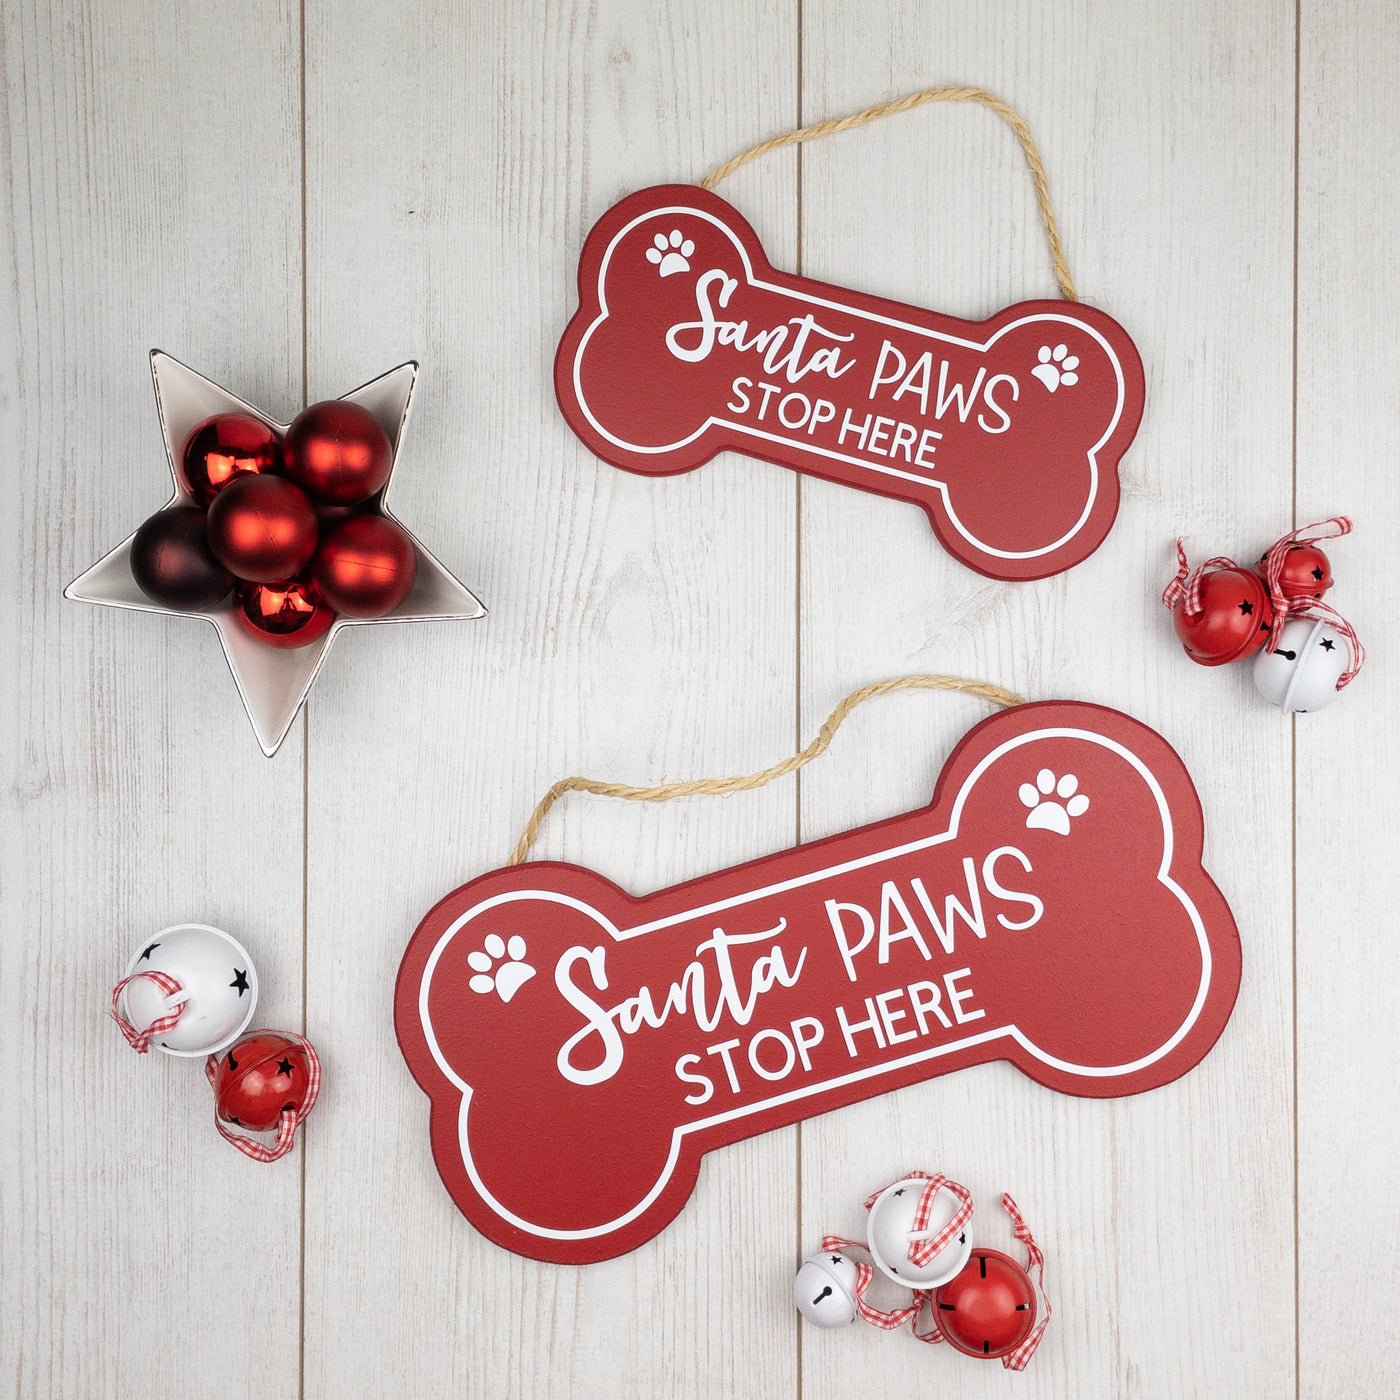 Santa Paws Stop Here Wooden Sign